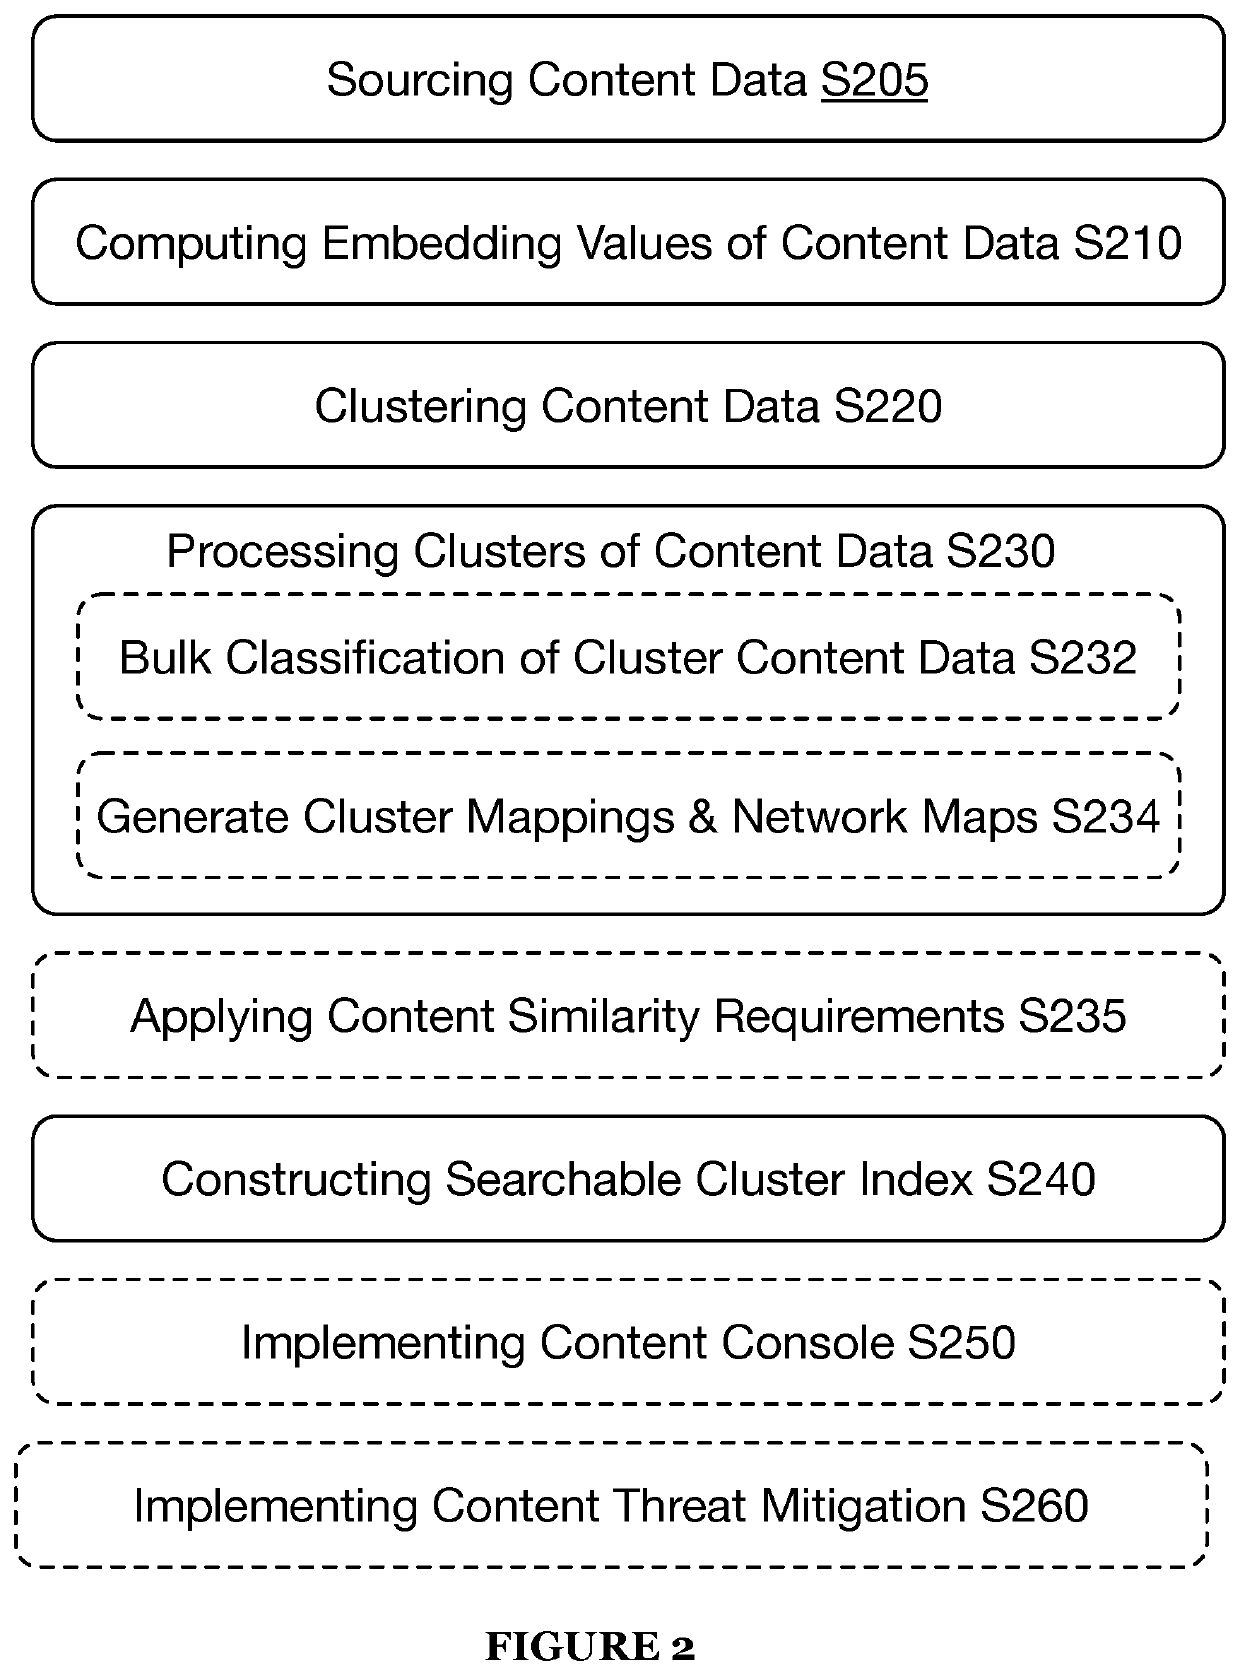 Systems and methods for machine learning-based digital content clustering, digital content threat detection, and digital content threat remediation in machine learning task-oriented digital threat mitigation platform